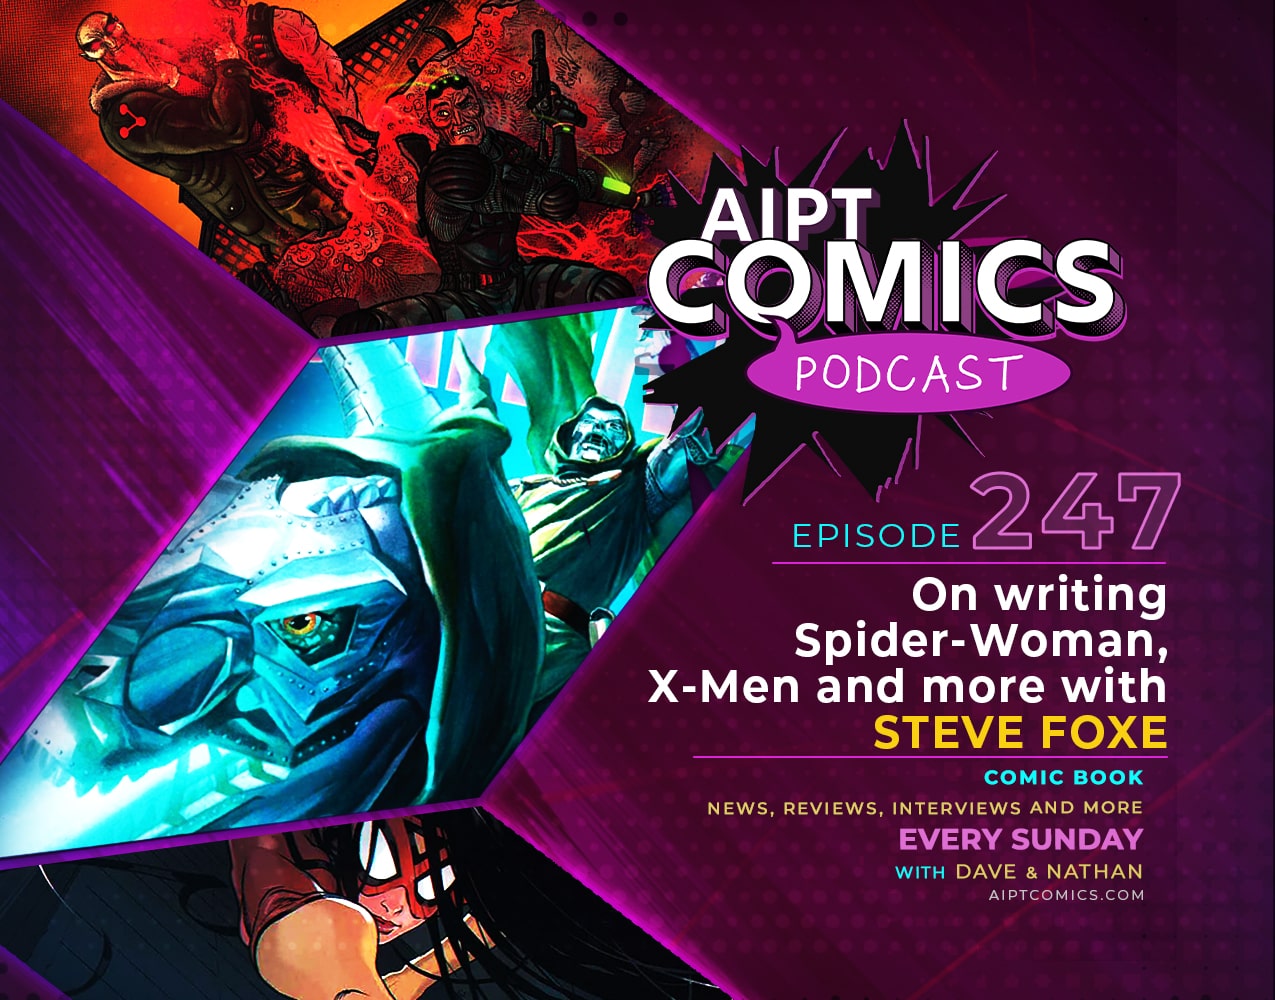 AIPT Comics Podcast Episode 247: On writing Spider-Woman, X-Men and more with Steve Foxe